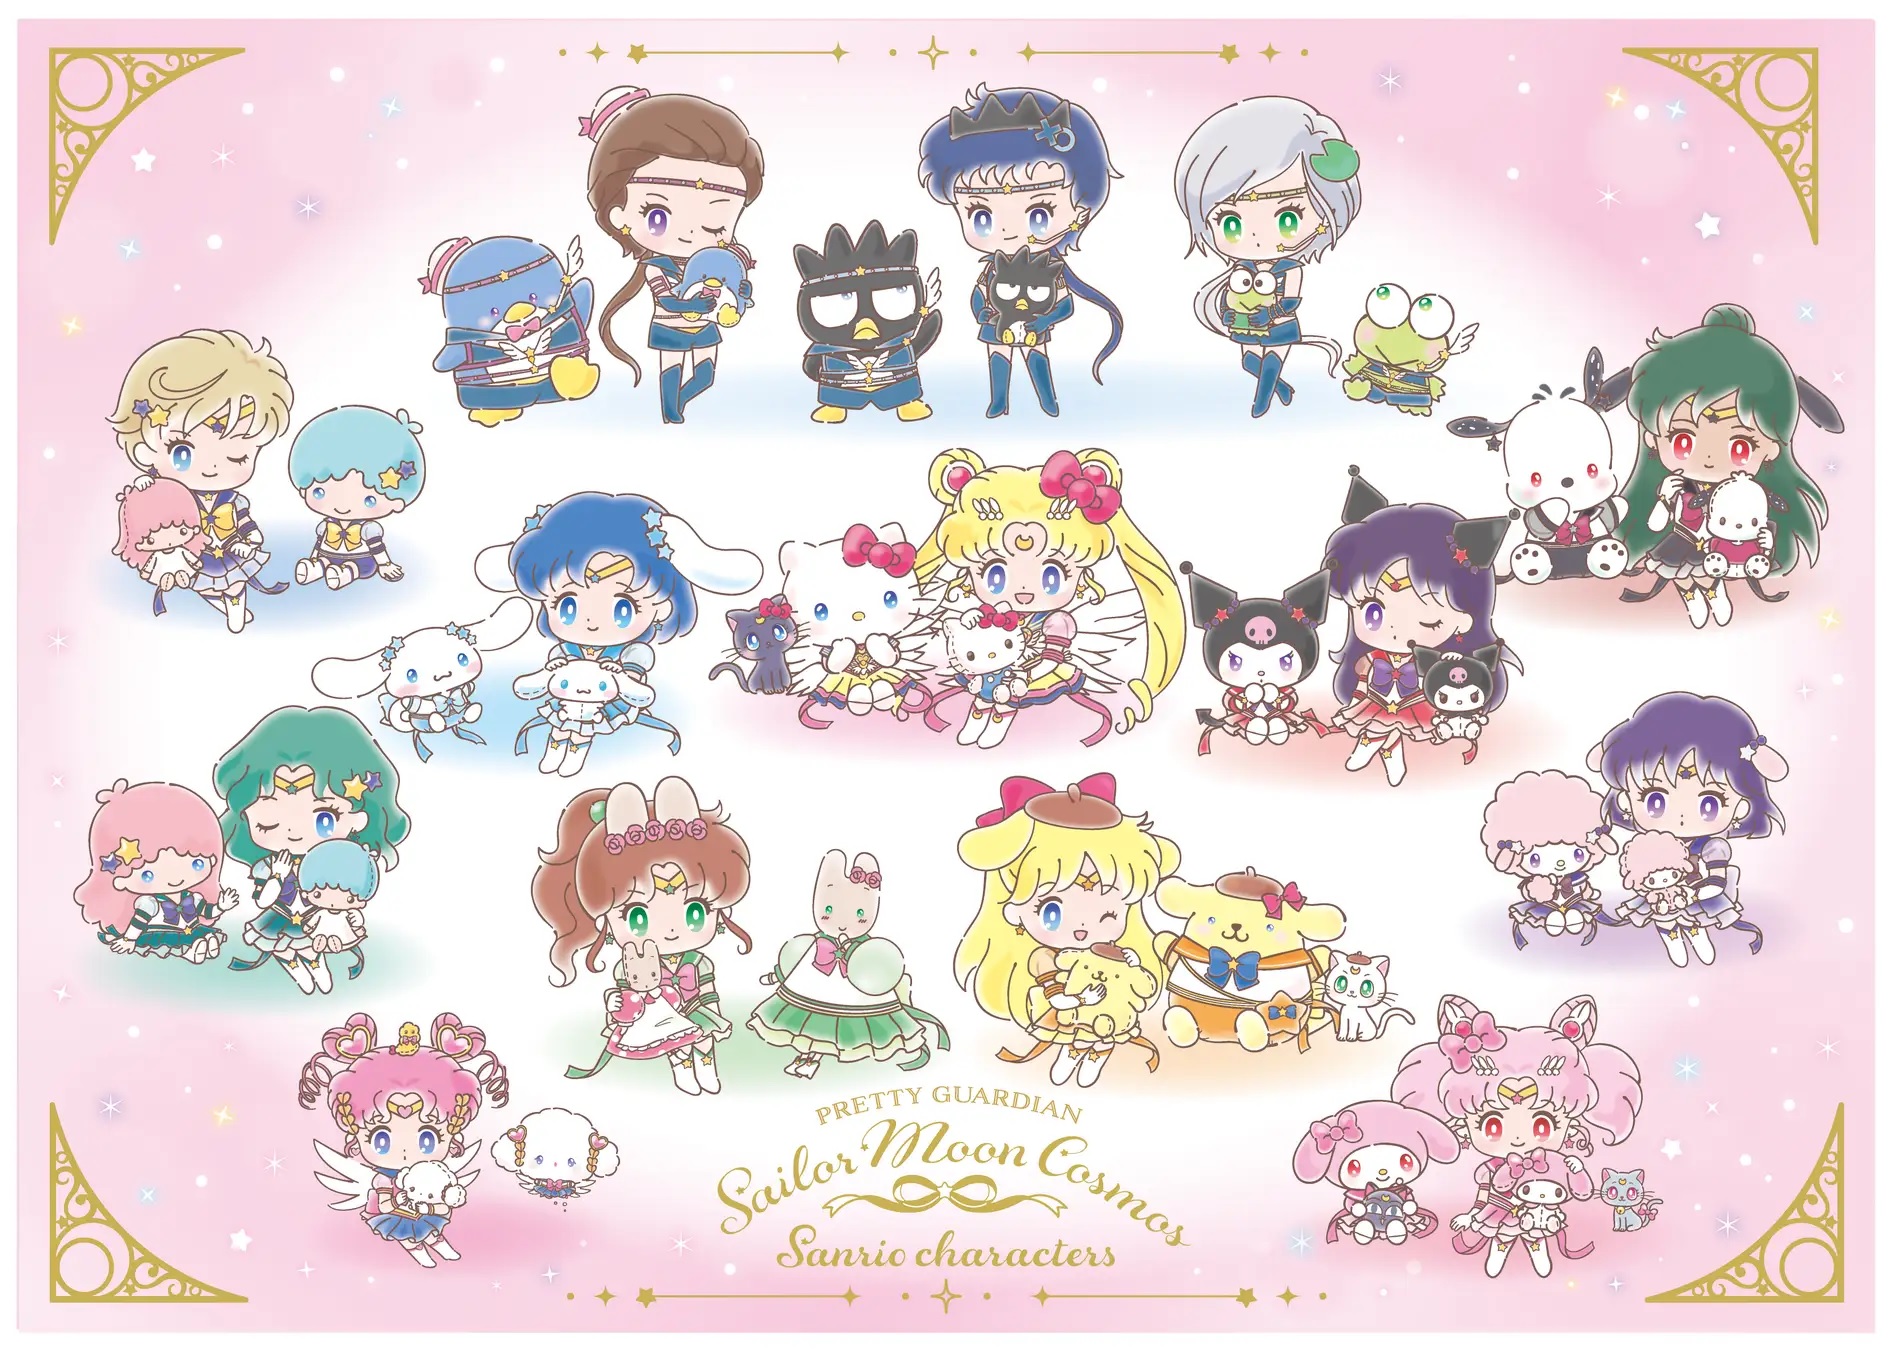 Sailor Moon Sanrio partnership adds pairings for Sailor Starlights in